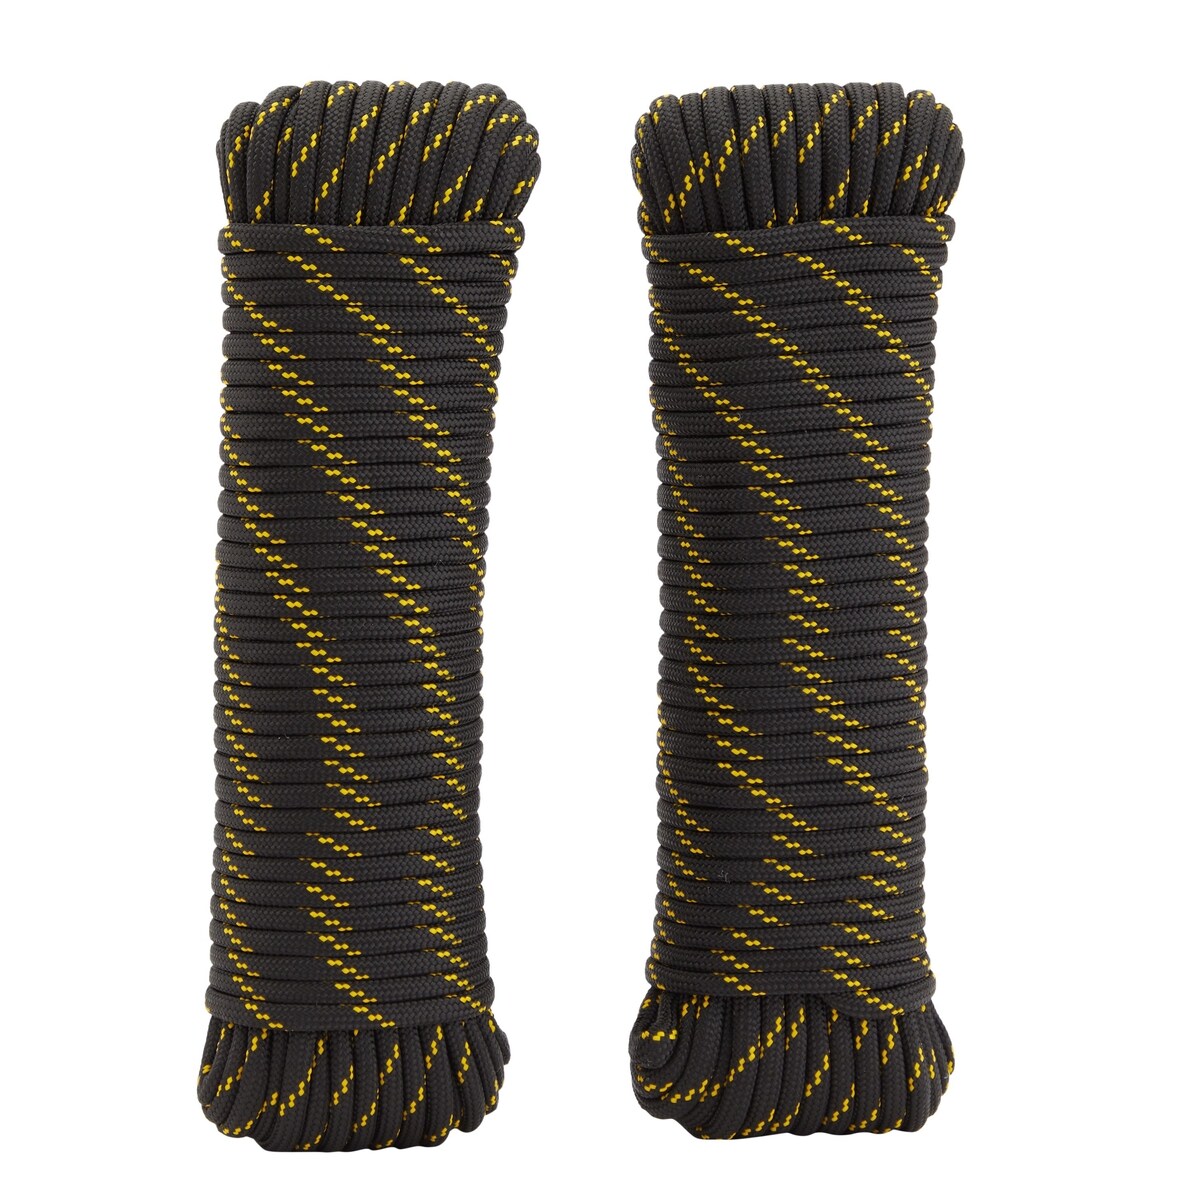 1/2 Inch x 100 Ft Diamond Braided Rope for Knot Tying Practice